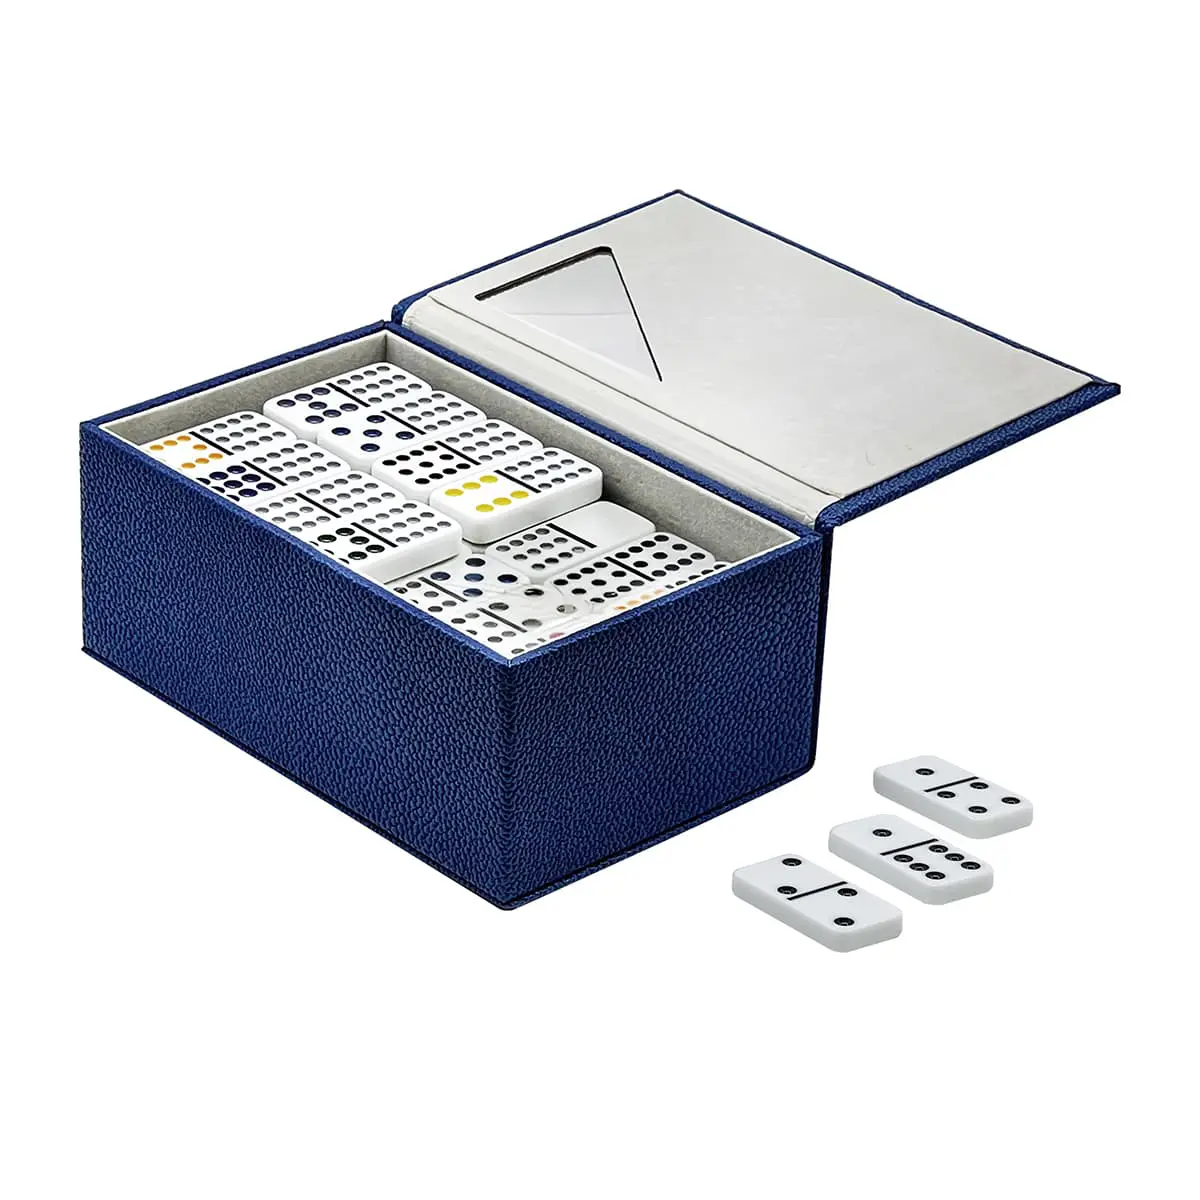 Double 12 Mexican Train Dominoes Set Pebbled Leatherette Box